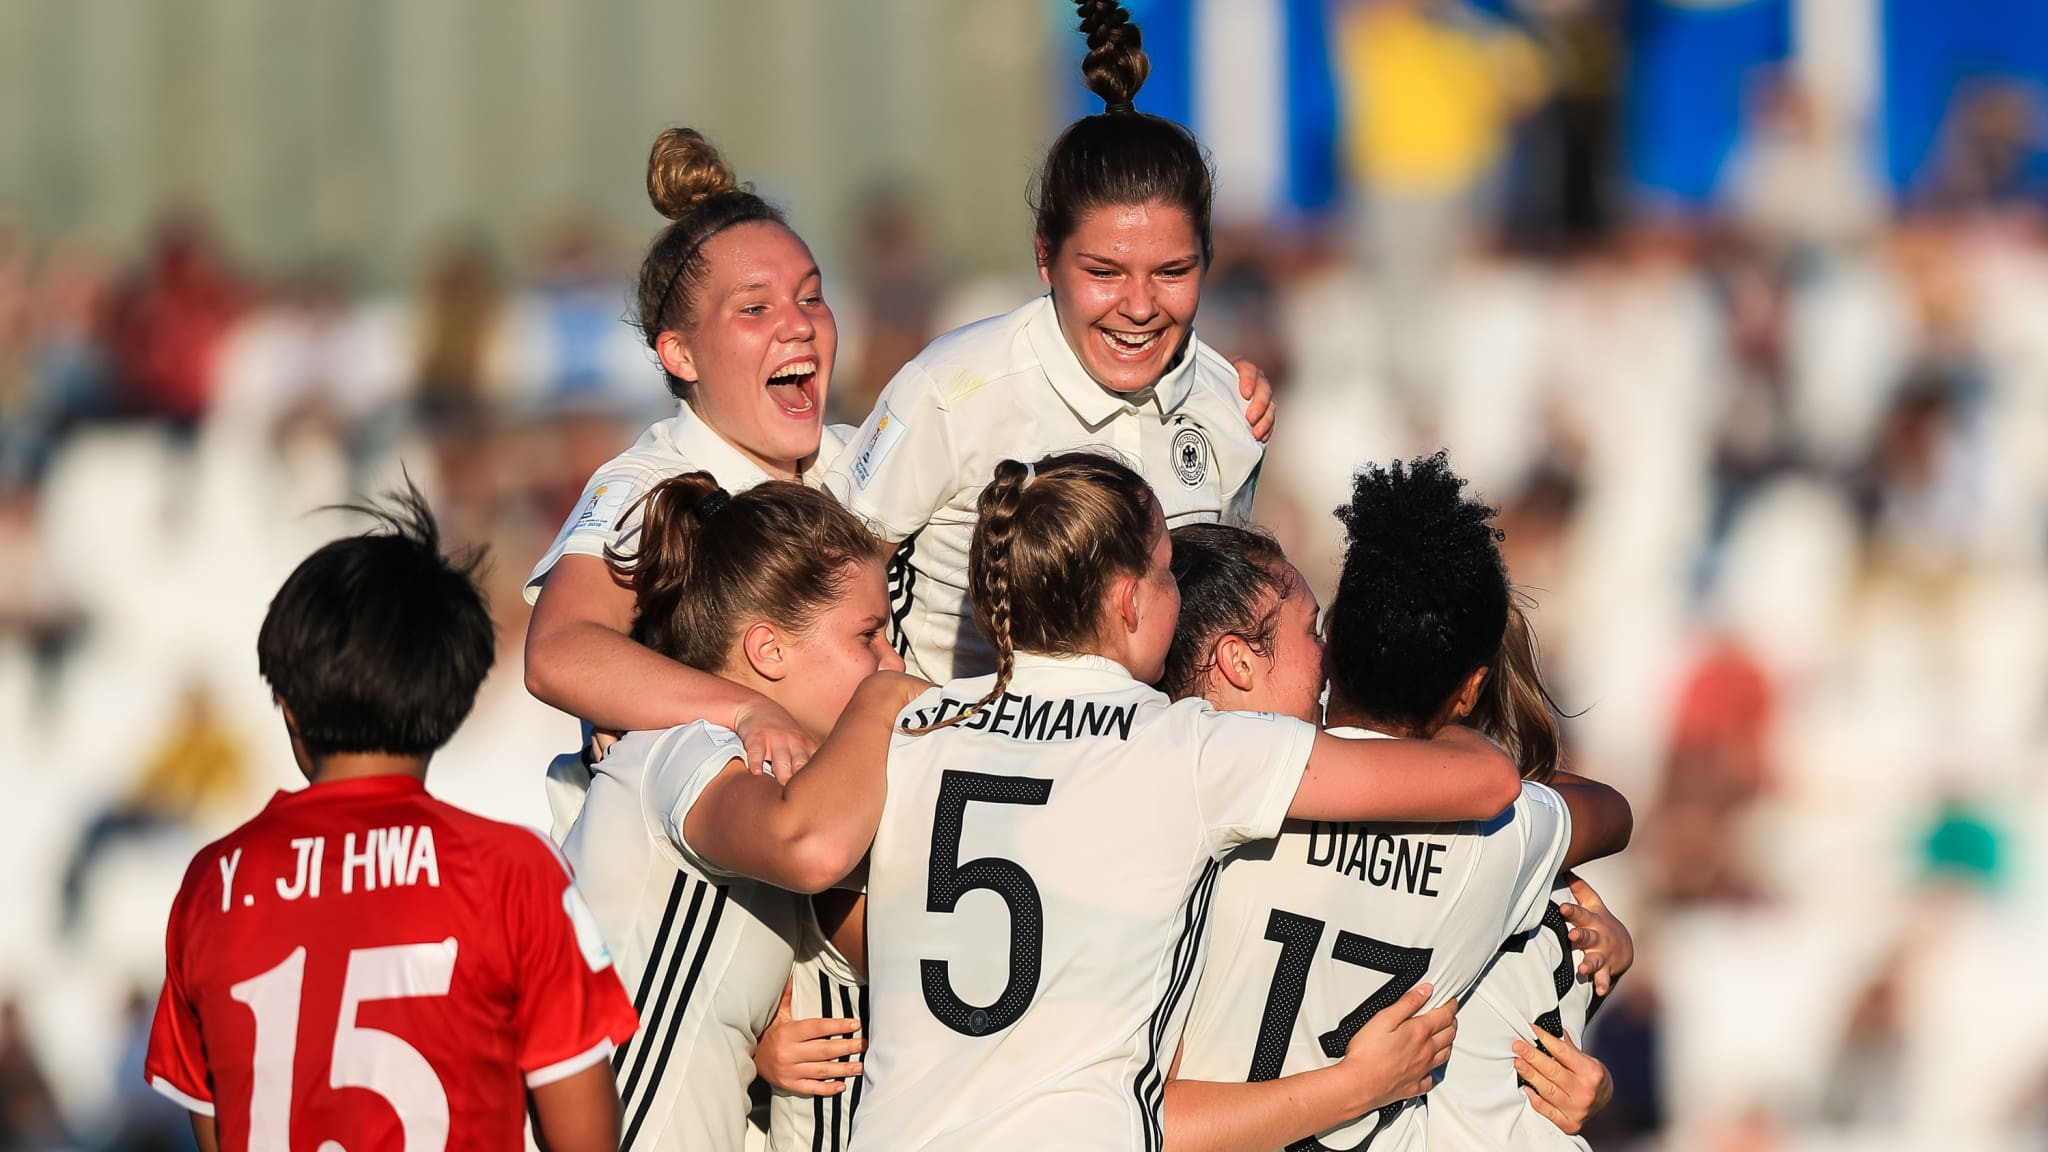 Germany celebrate after beating defending champions North Korea in their opening match of the FIFA under-17 Women’s World Cup ©FIFA